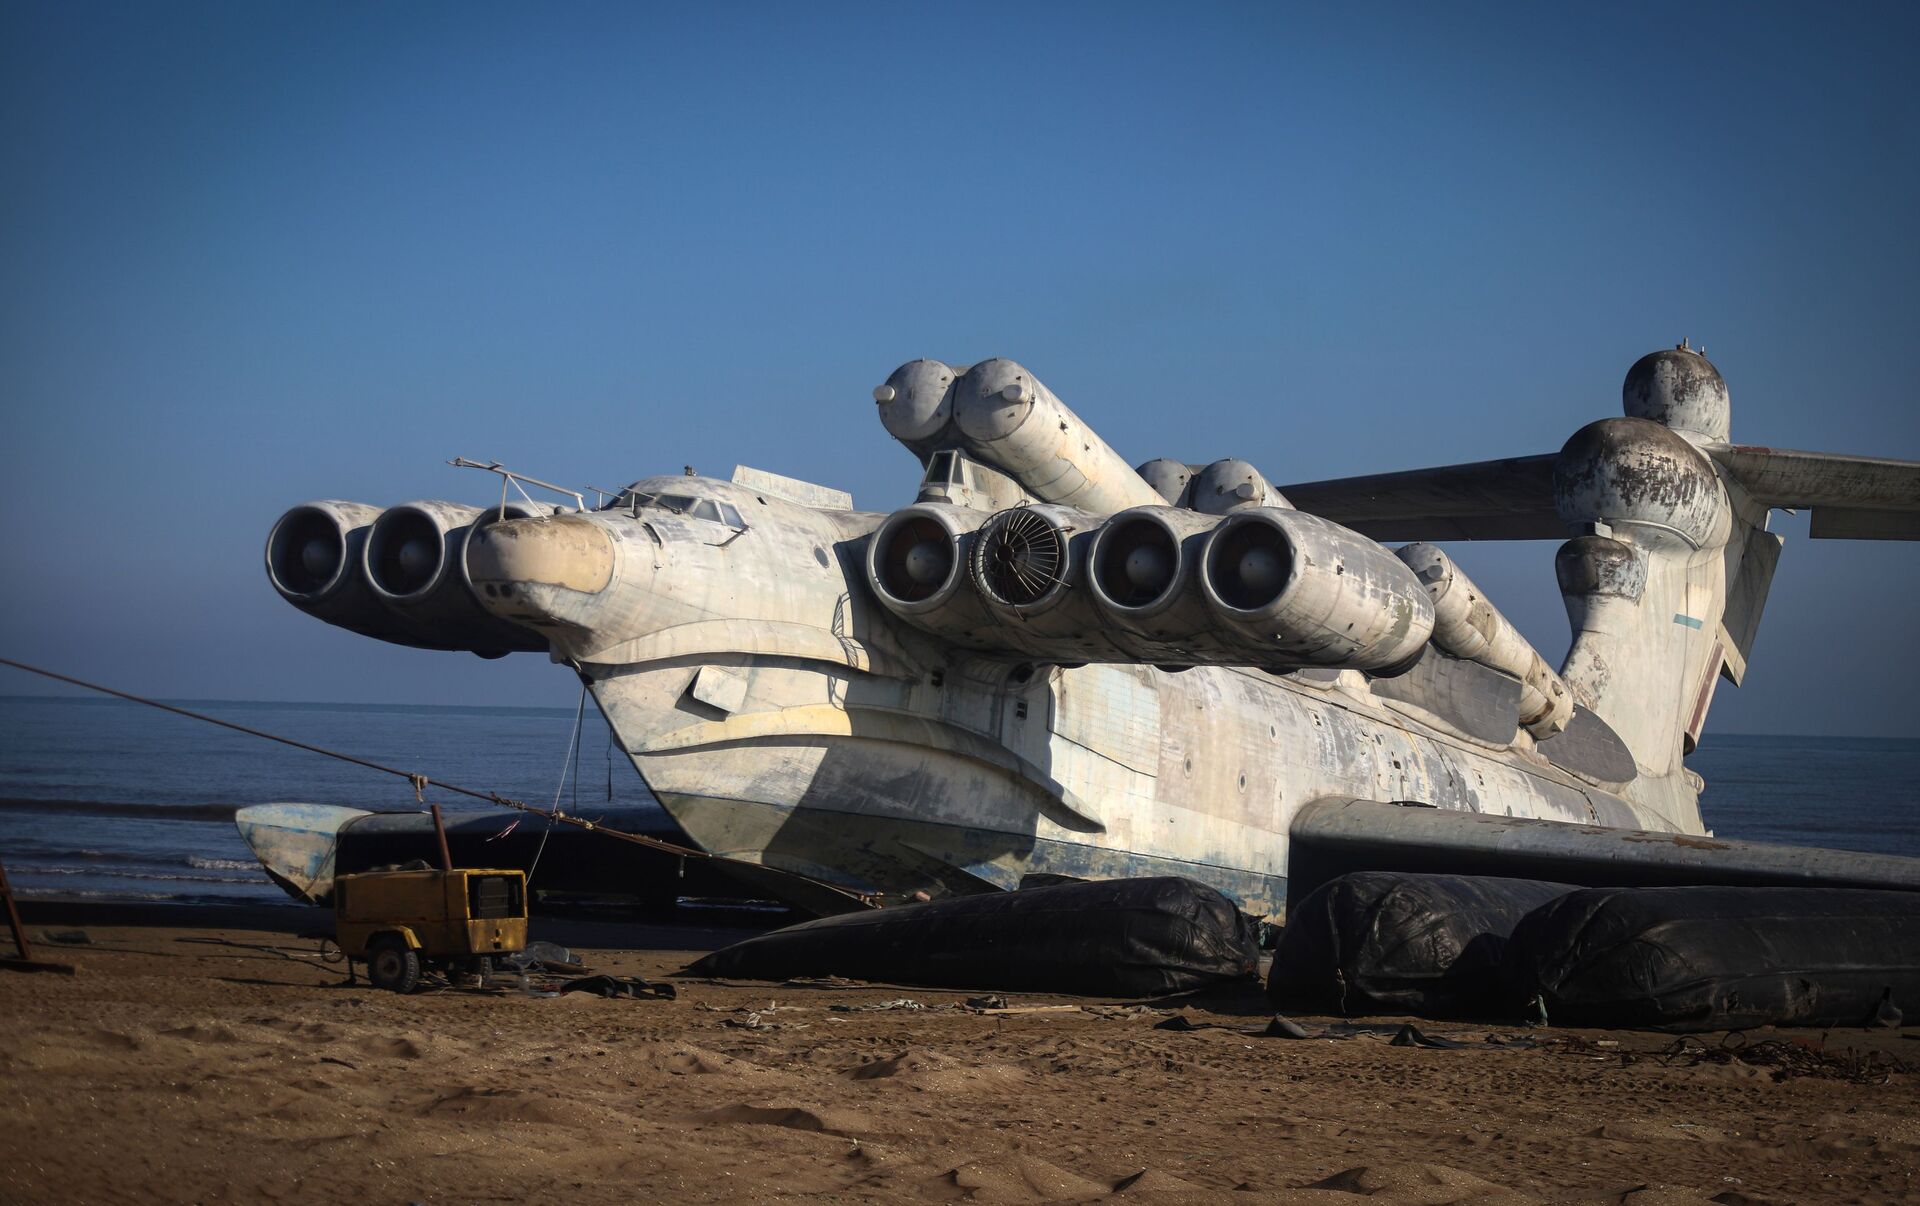 The 'Caspian Sea Monster' rises from the grave